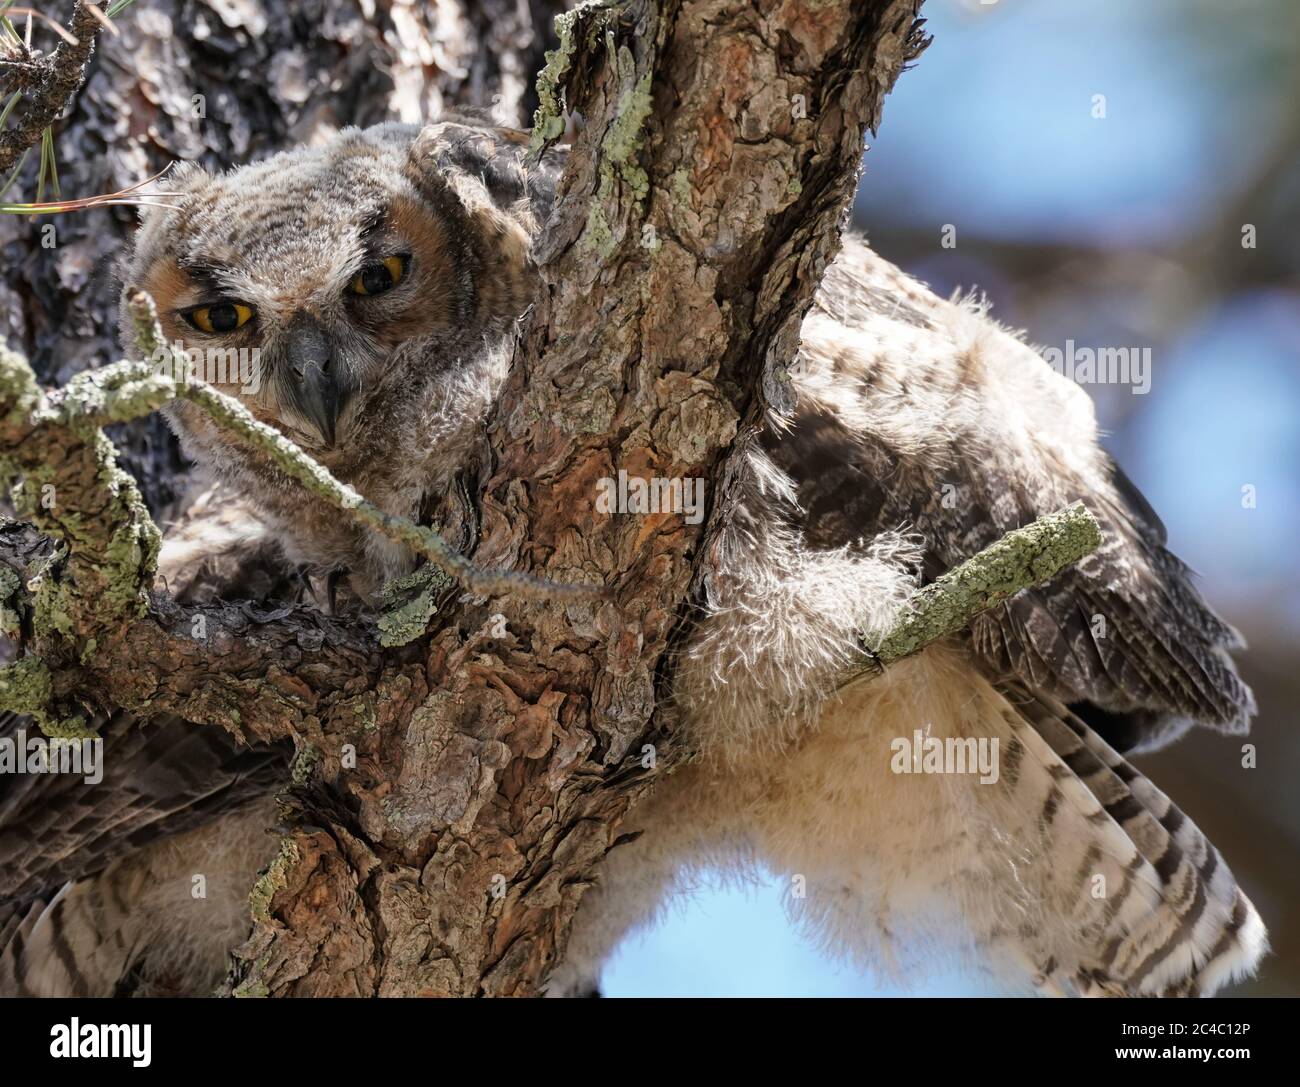 A baby Great Horned Owl looks down at the camera while perched on a large pine tree. Stock Photo